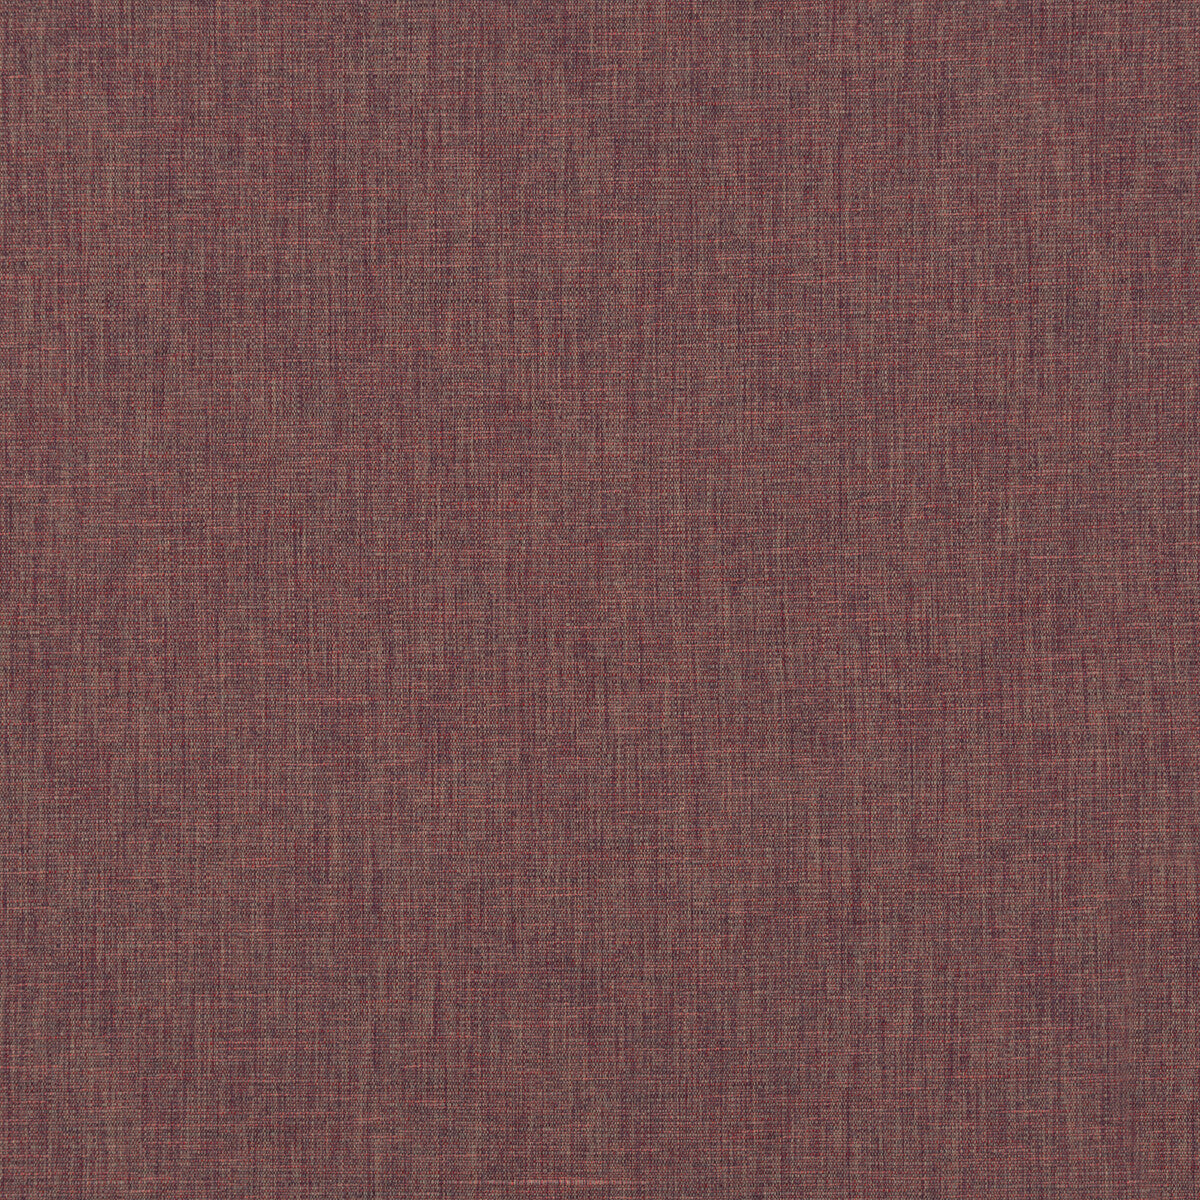 Kinnerton fabric in berry color - pattern PF50414.474.0 - by Baker Lifestyle in the Notebooks collection